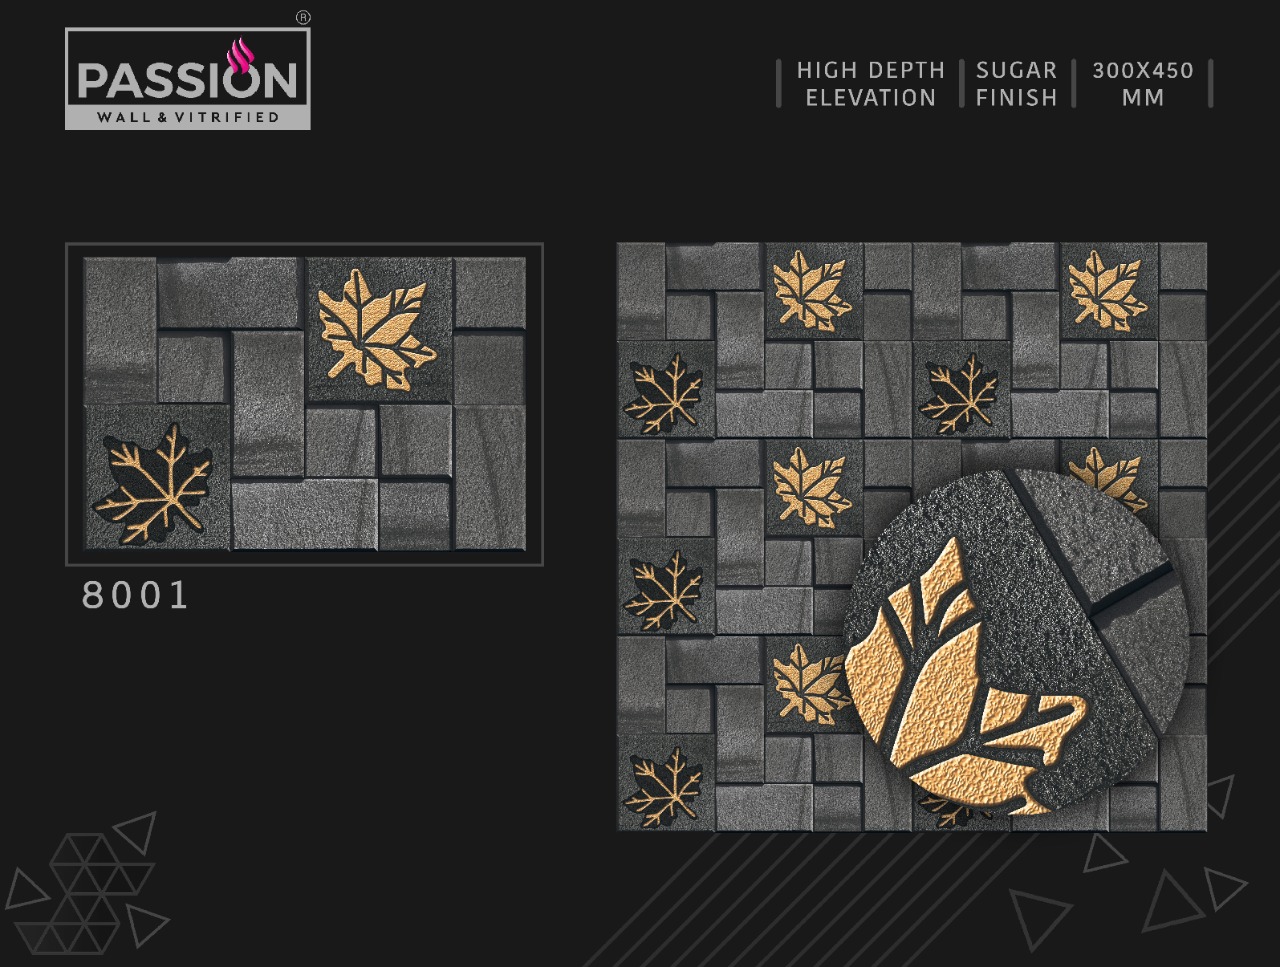 8001 High Depth Elevation Tiles from Passion Vitrified